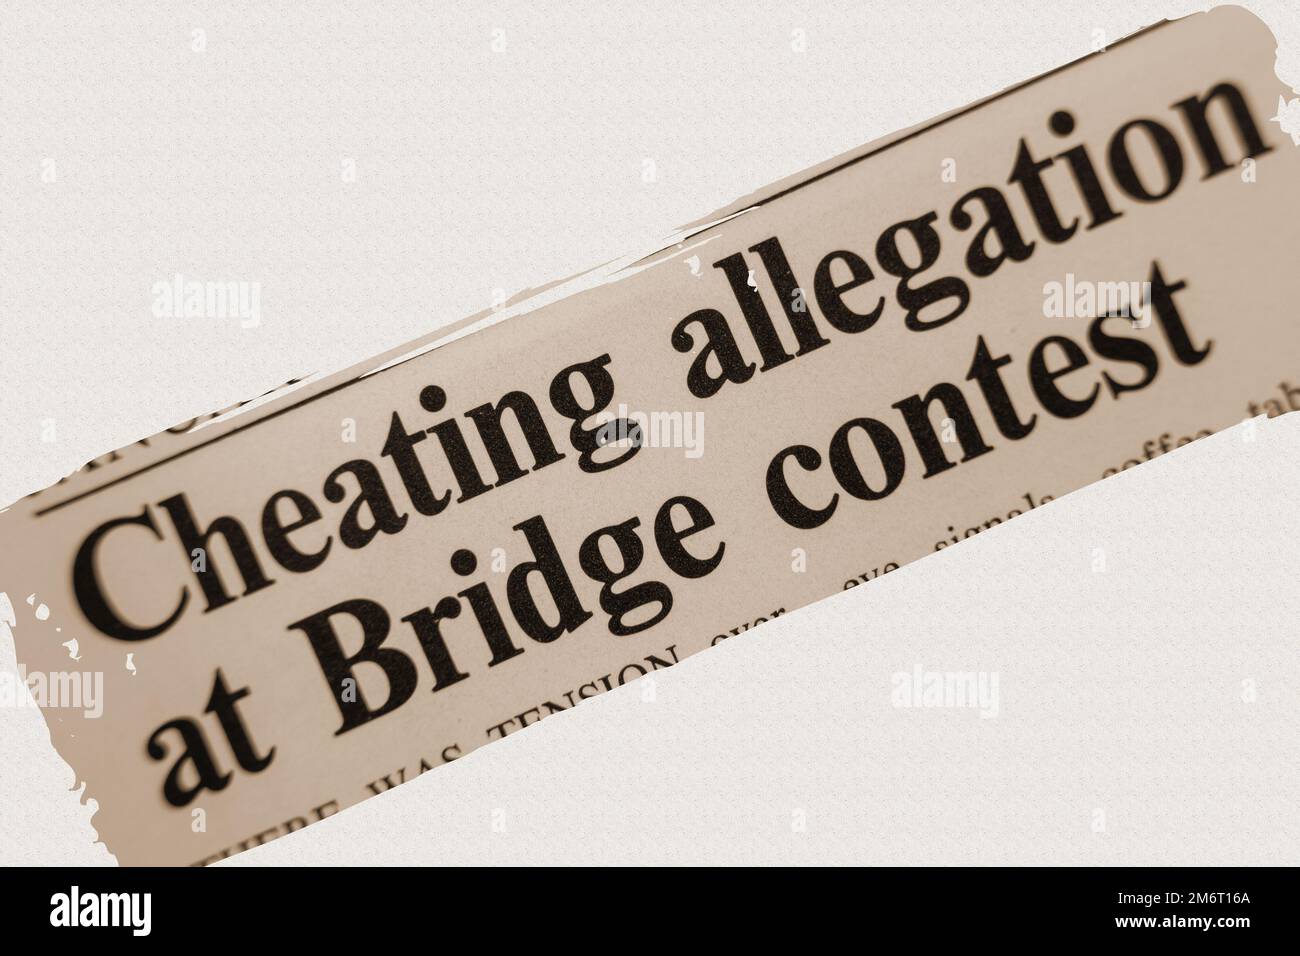 news story from 1975 newspaper headline article title - Cheating allegations at Bridge contest in sepia Stock Photo